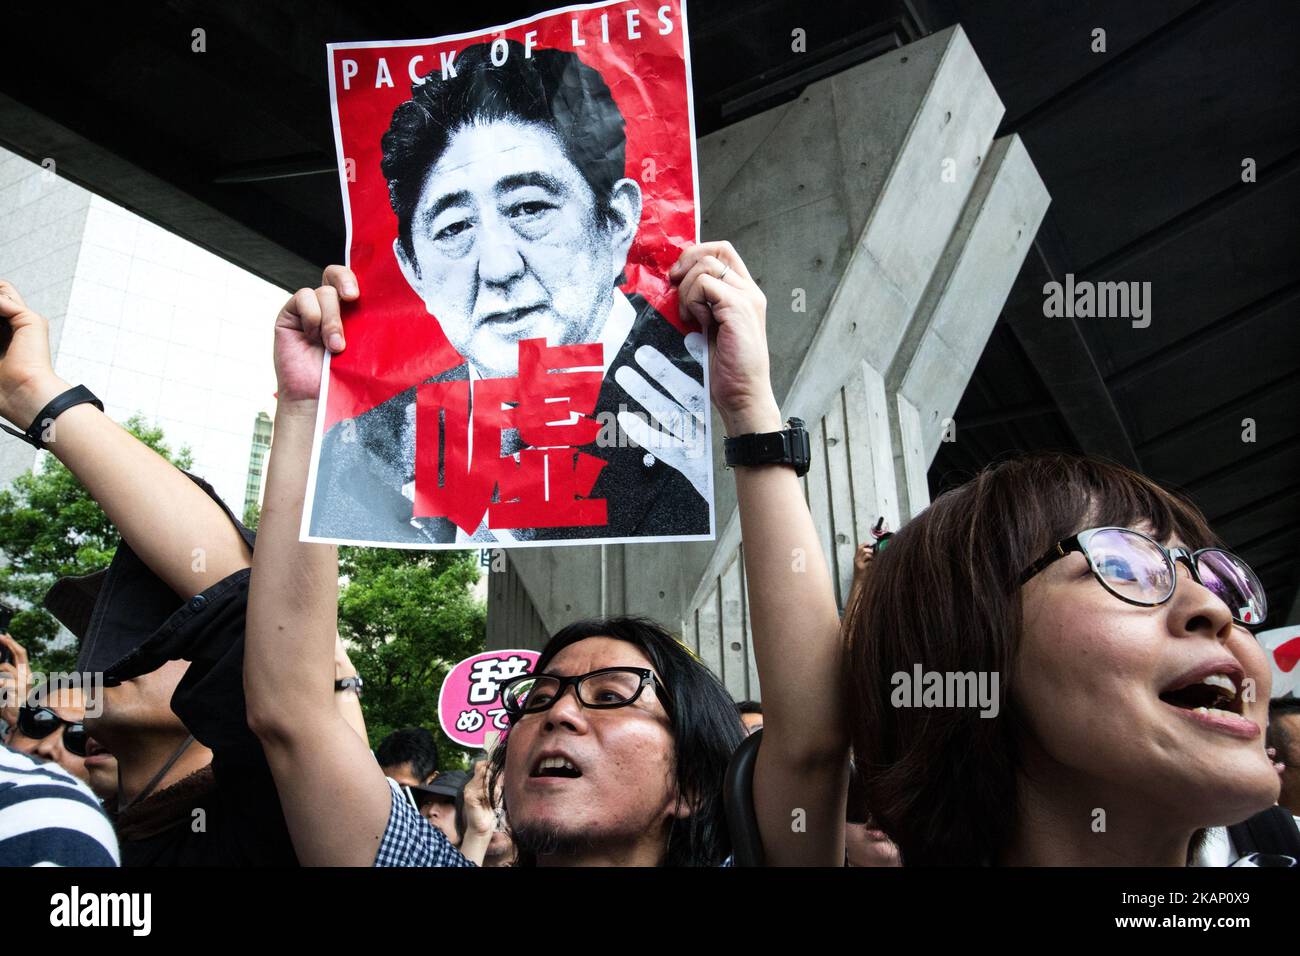 Anti-Abe protesters gathers and chant “Abe wa Yamero!” 'Resign Prime Minister Abe!” during the speech of Japanese Prime Minister Shinzo Abe for his candidate Aya Nakamura of main opposition, Liberal Democratic Party (LDP) in Akihabara, Tokyo, Japan on July 1, 2017. Tokyo Metropolitan Assembly election will be held on July 2. (Photo by Richard Atrero de Guzman/NurPhoto) *** Please Use Credit from Credit Field *** Stock Photo